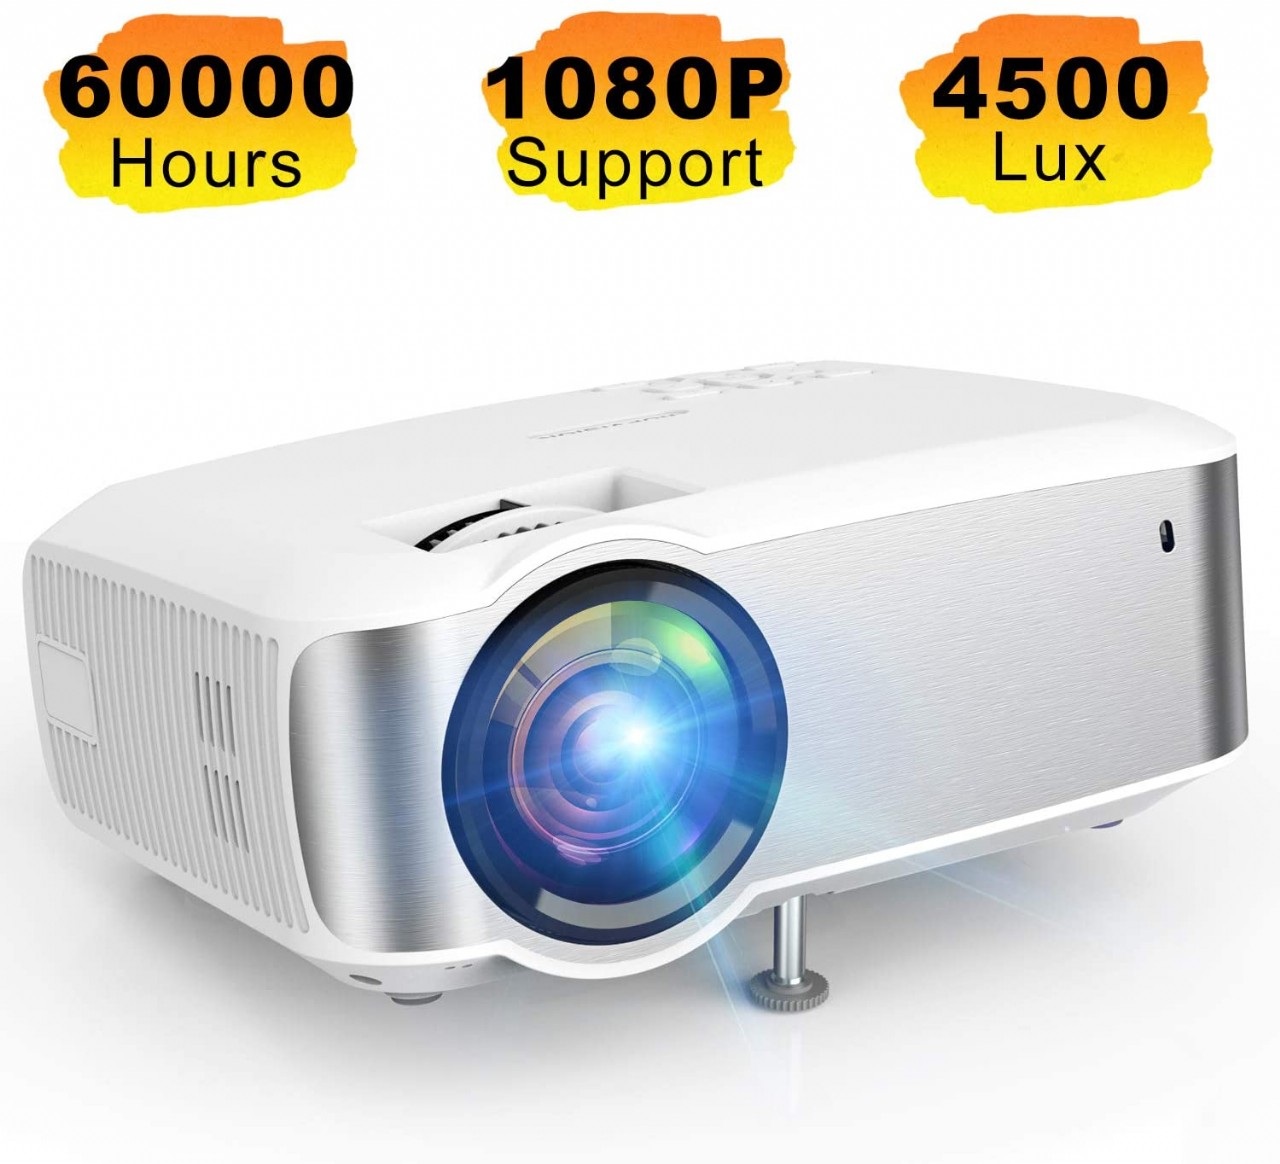 Projector, TOPVISION 1080P Supported Video Projector with 4500L, 60,000 Hrs Home Projector